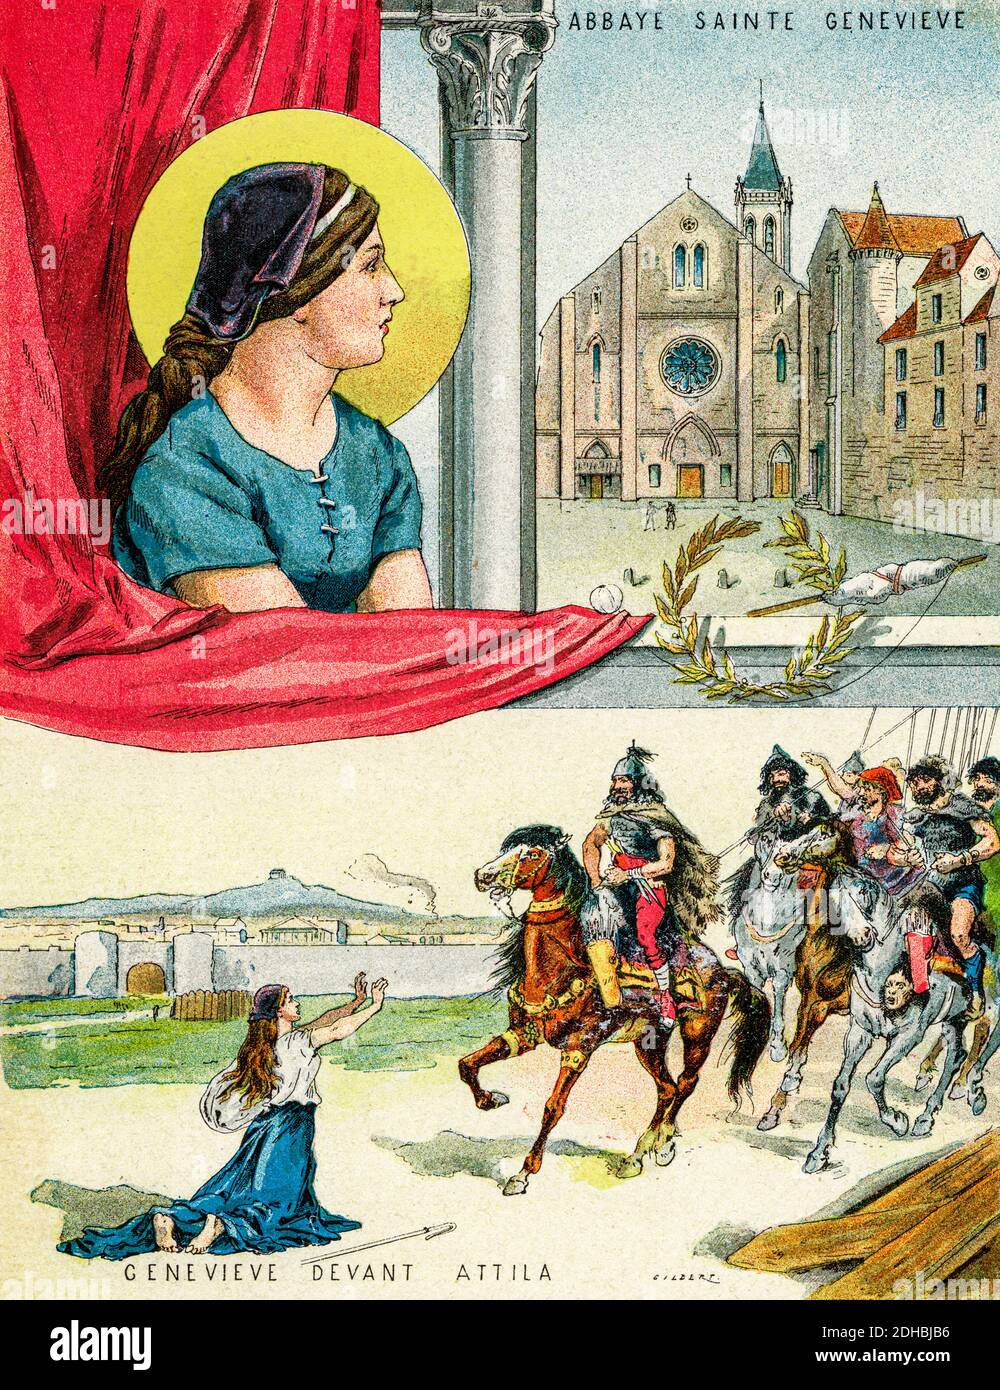 Old color lithography portrait of Saint Genevieve of Paris (422-512) Sainte Genevieve, french nun and saint. The abbaye Sainte Genevieve. Sainte Genevieve implores Attila to be merciful and spare the city of Paris. France. Les Français Illustres by Gustave Demoulin 1897 Stock Photo